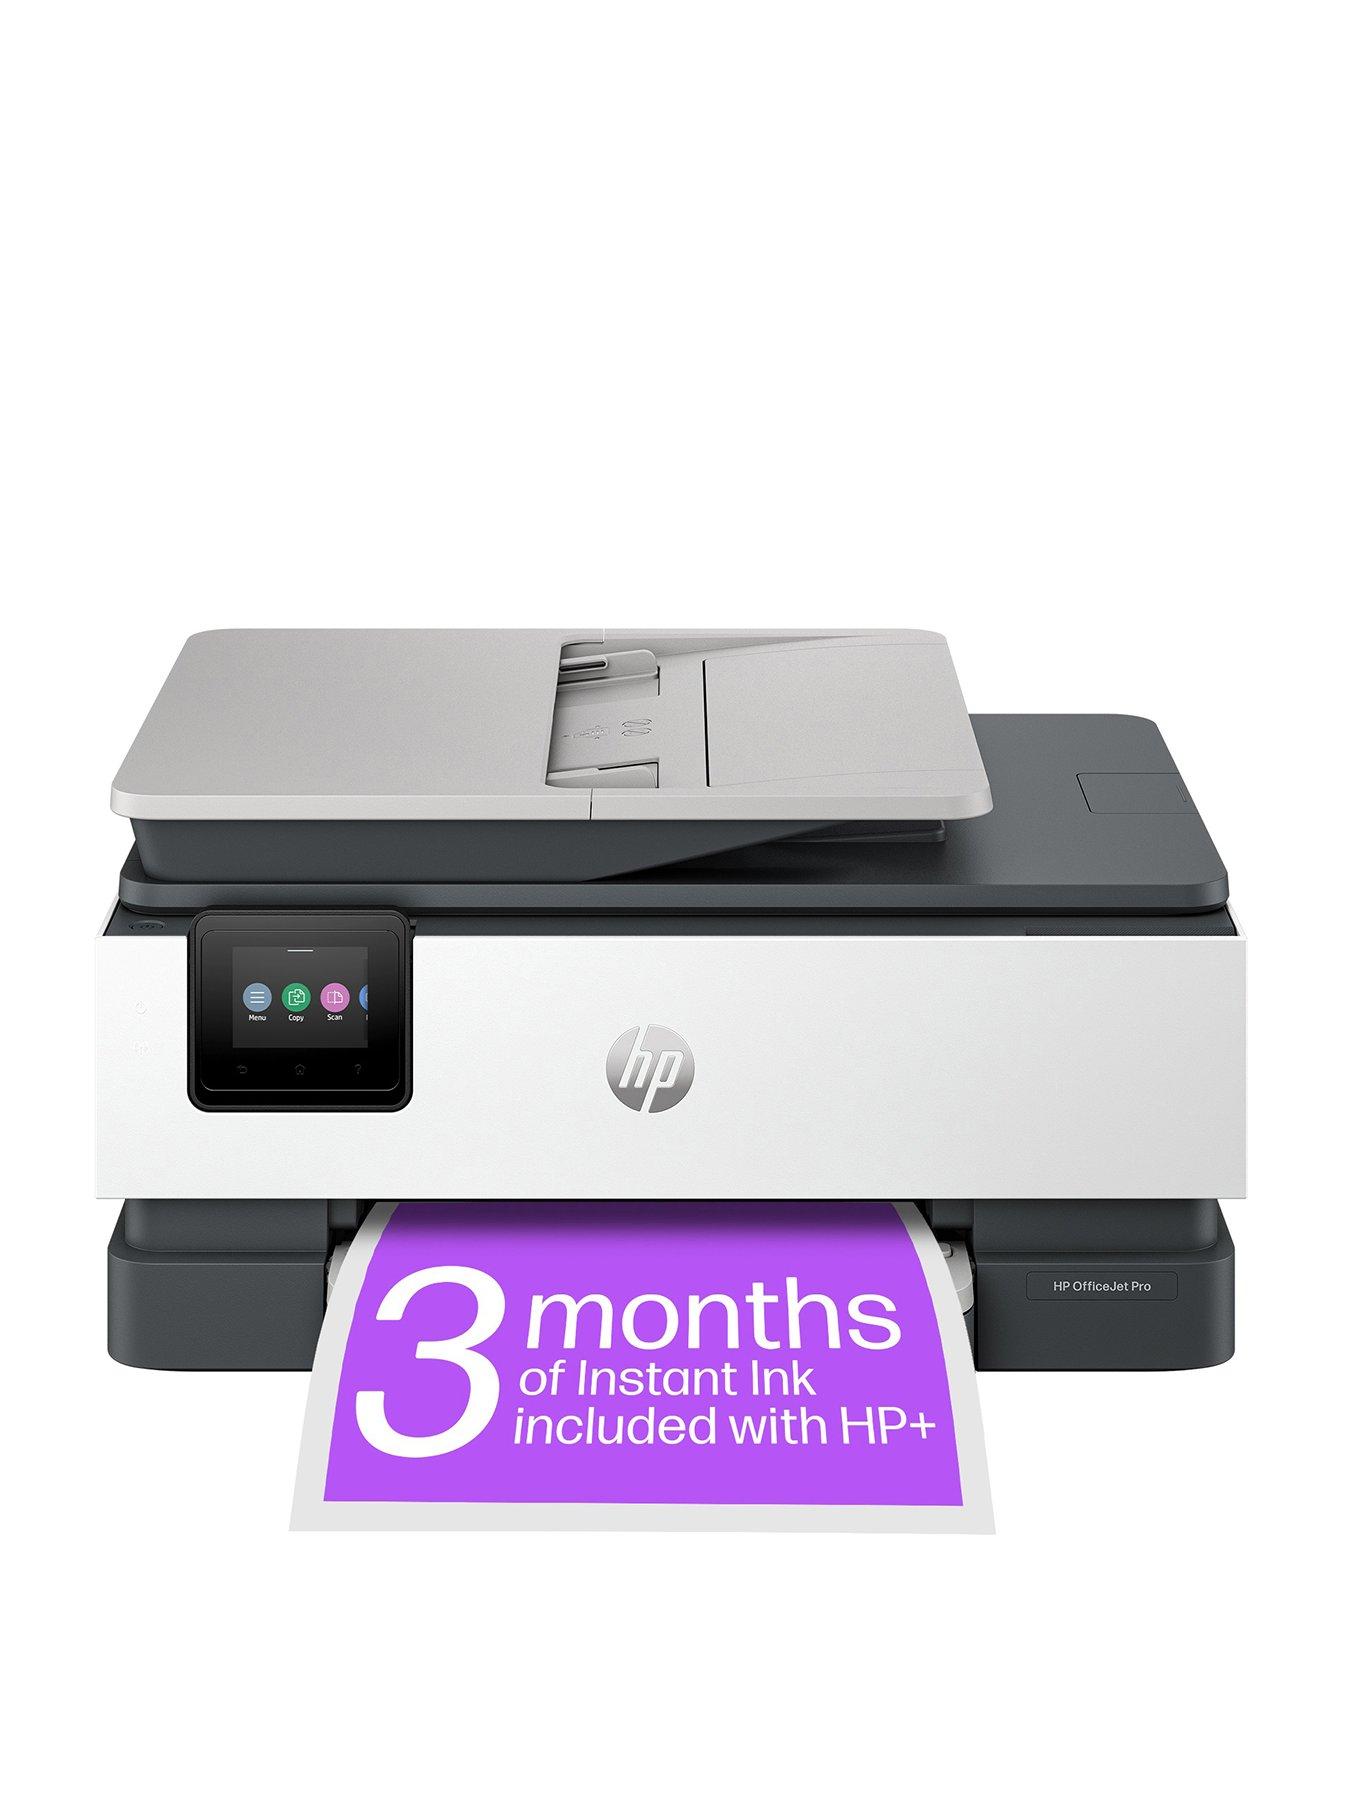 Hp Officejet Pro 8122E All-In-One Wireless Colour Printer With 3 Months Of Instant Ink Included With Hp+